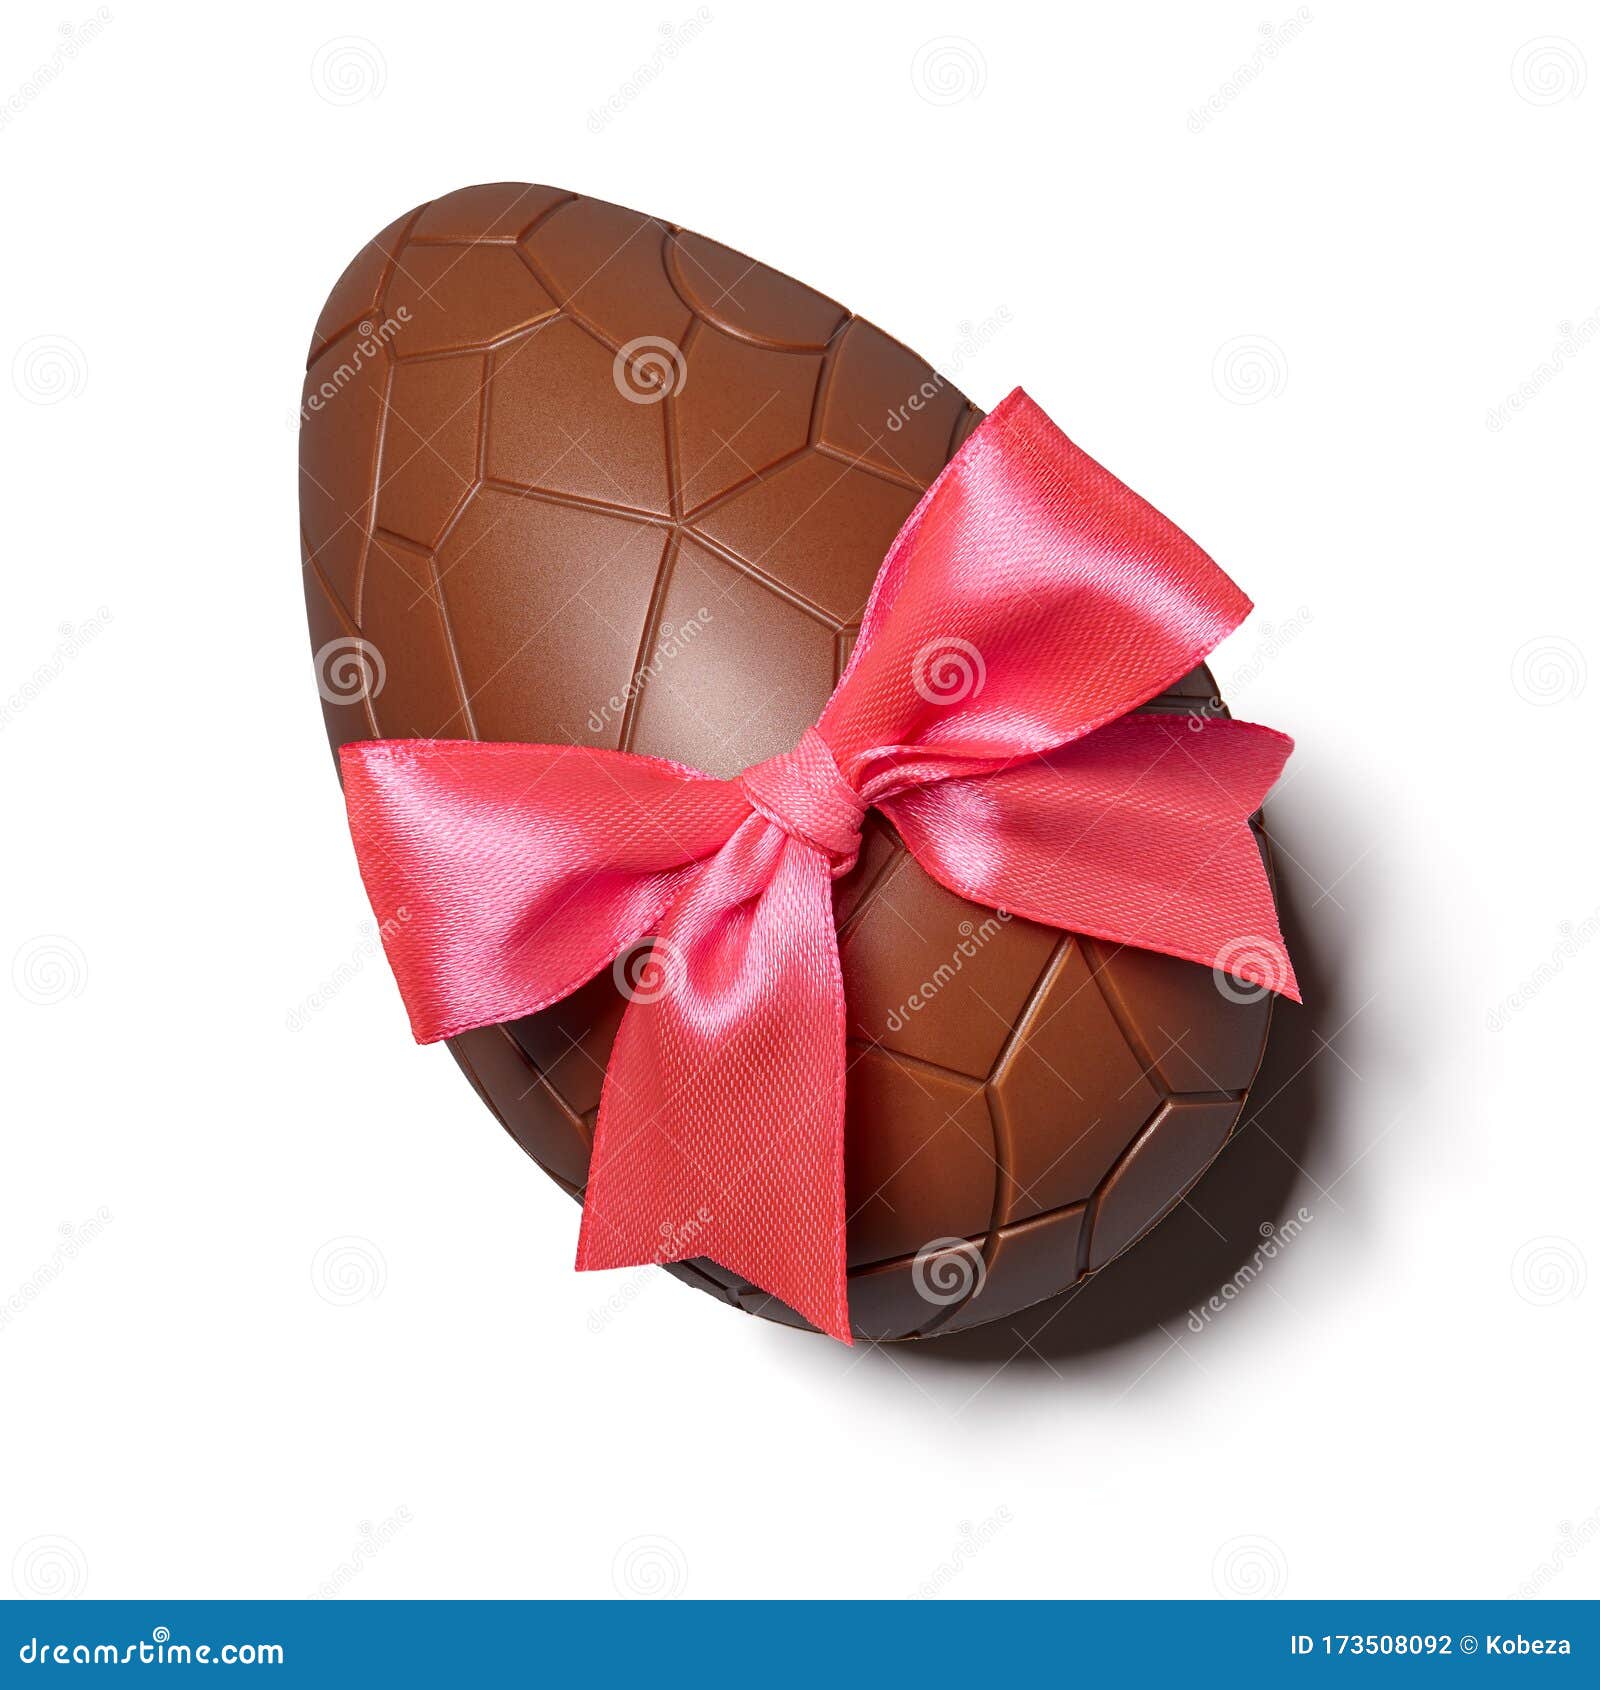 Chocolate Easter Egg Stock Photos and Images - 123RF